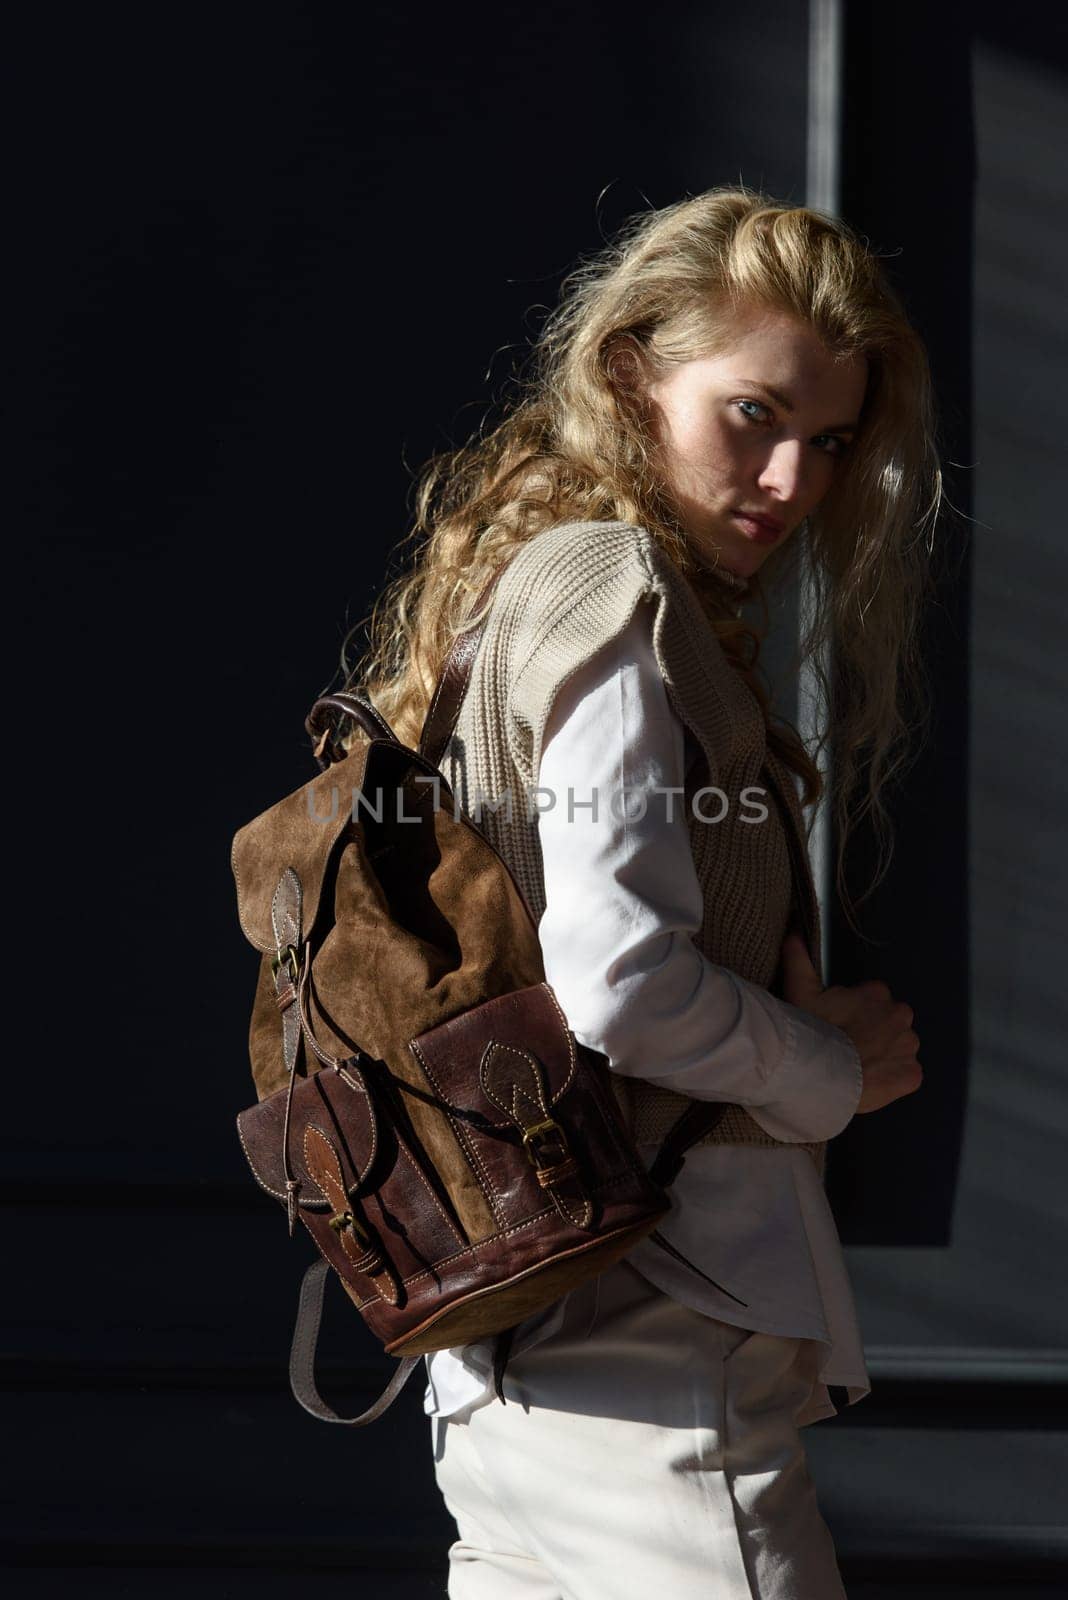 beautiful curly blond hair woman posing with a leather backpack by Ashtray25